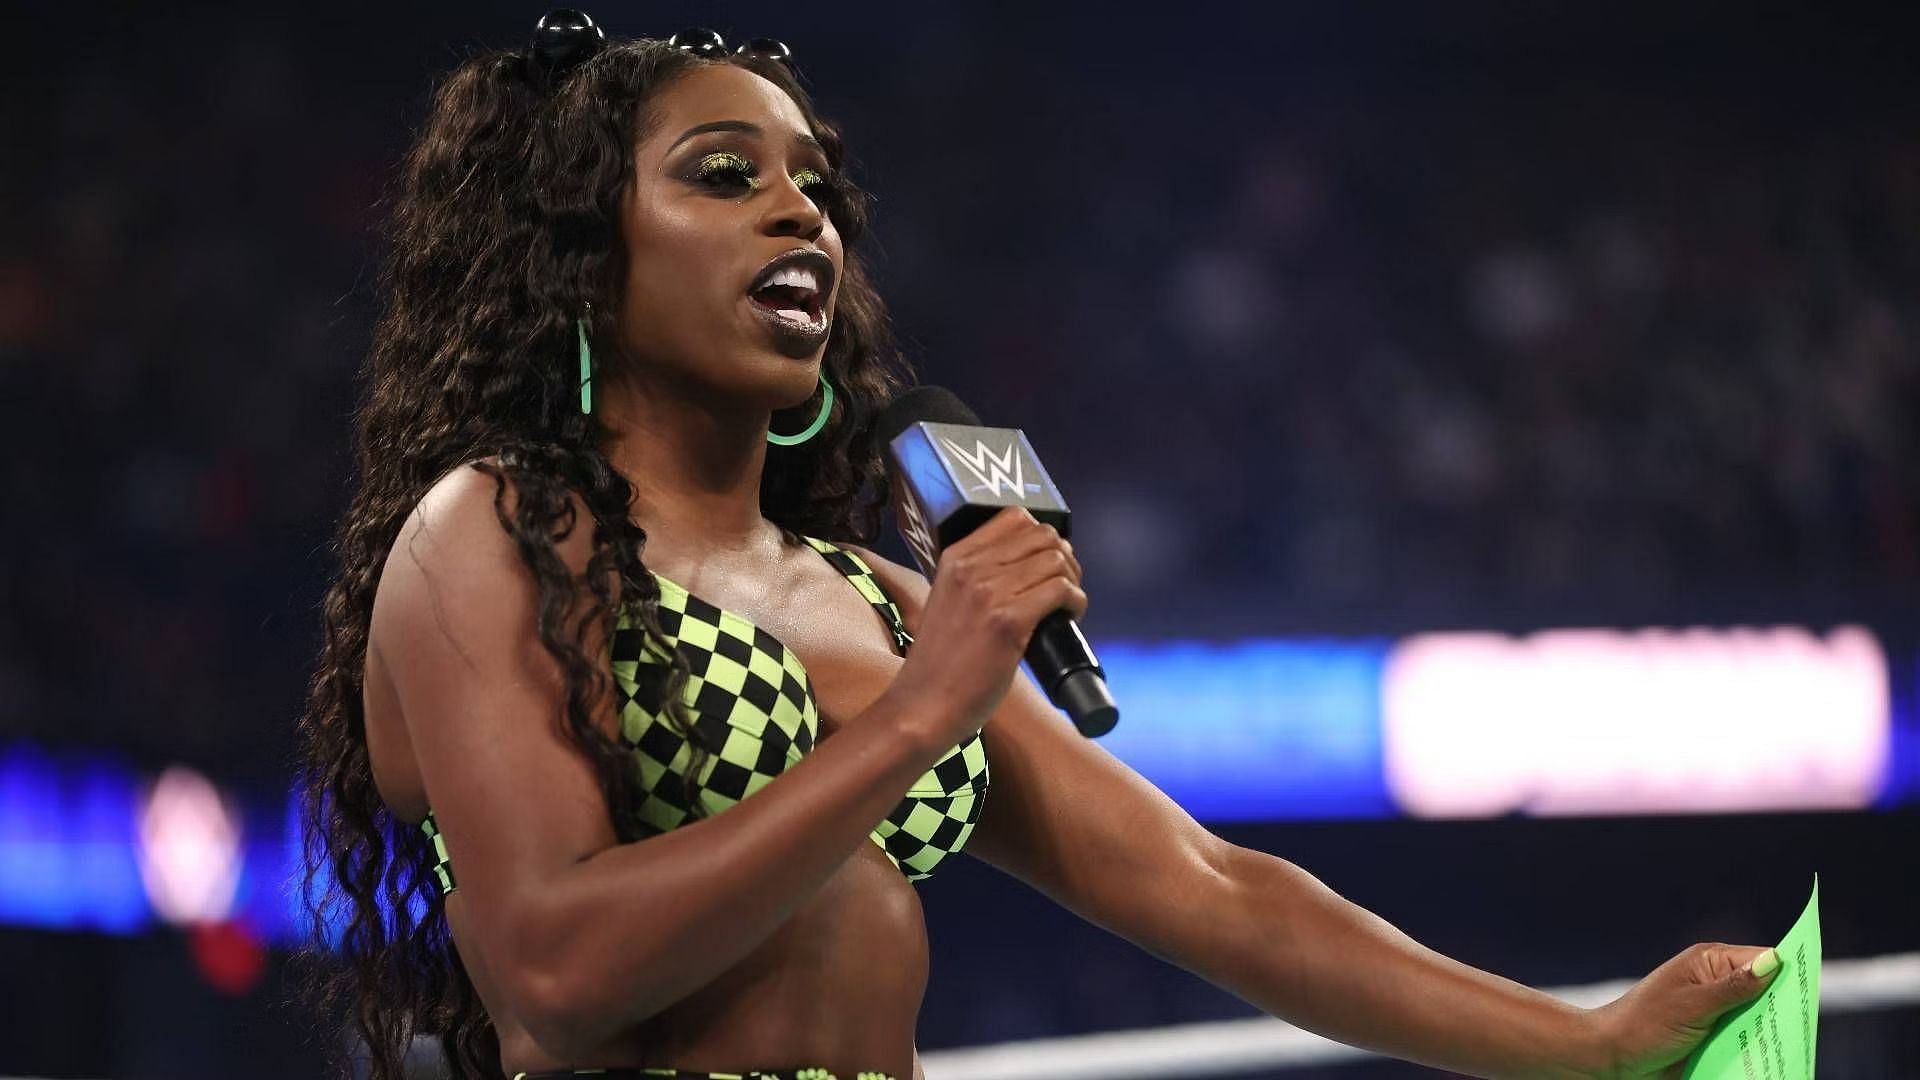 Naomi could bring back the &quot;glow&quot; to WWE!